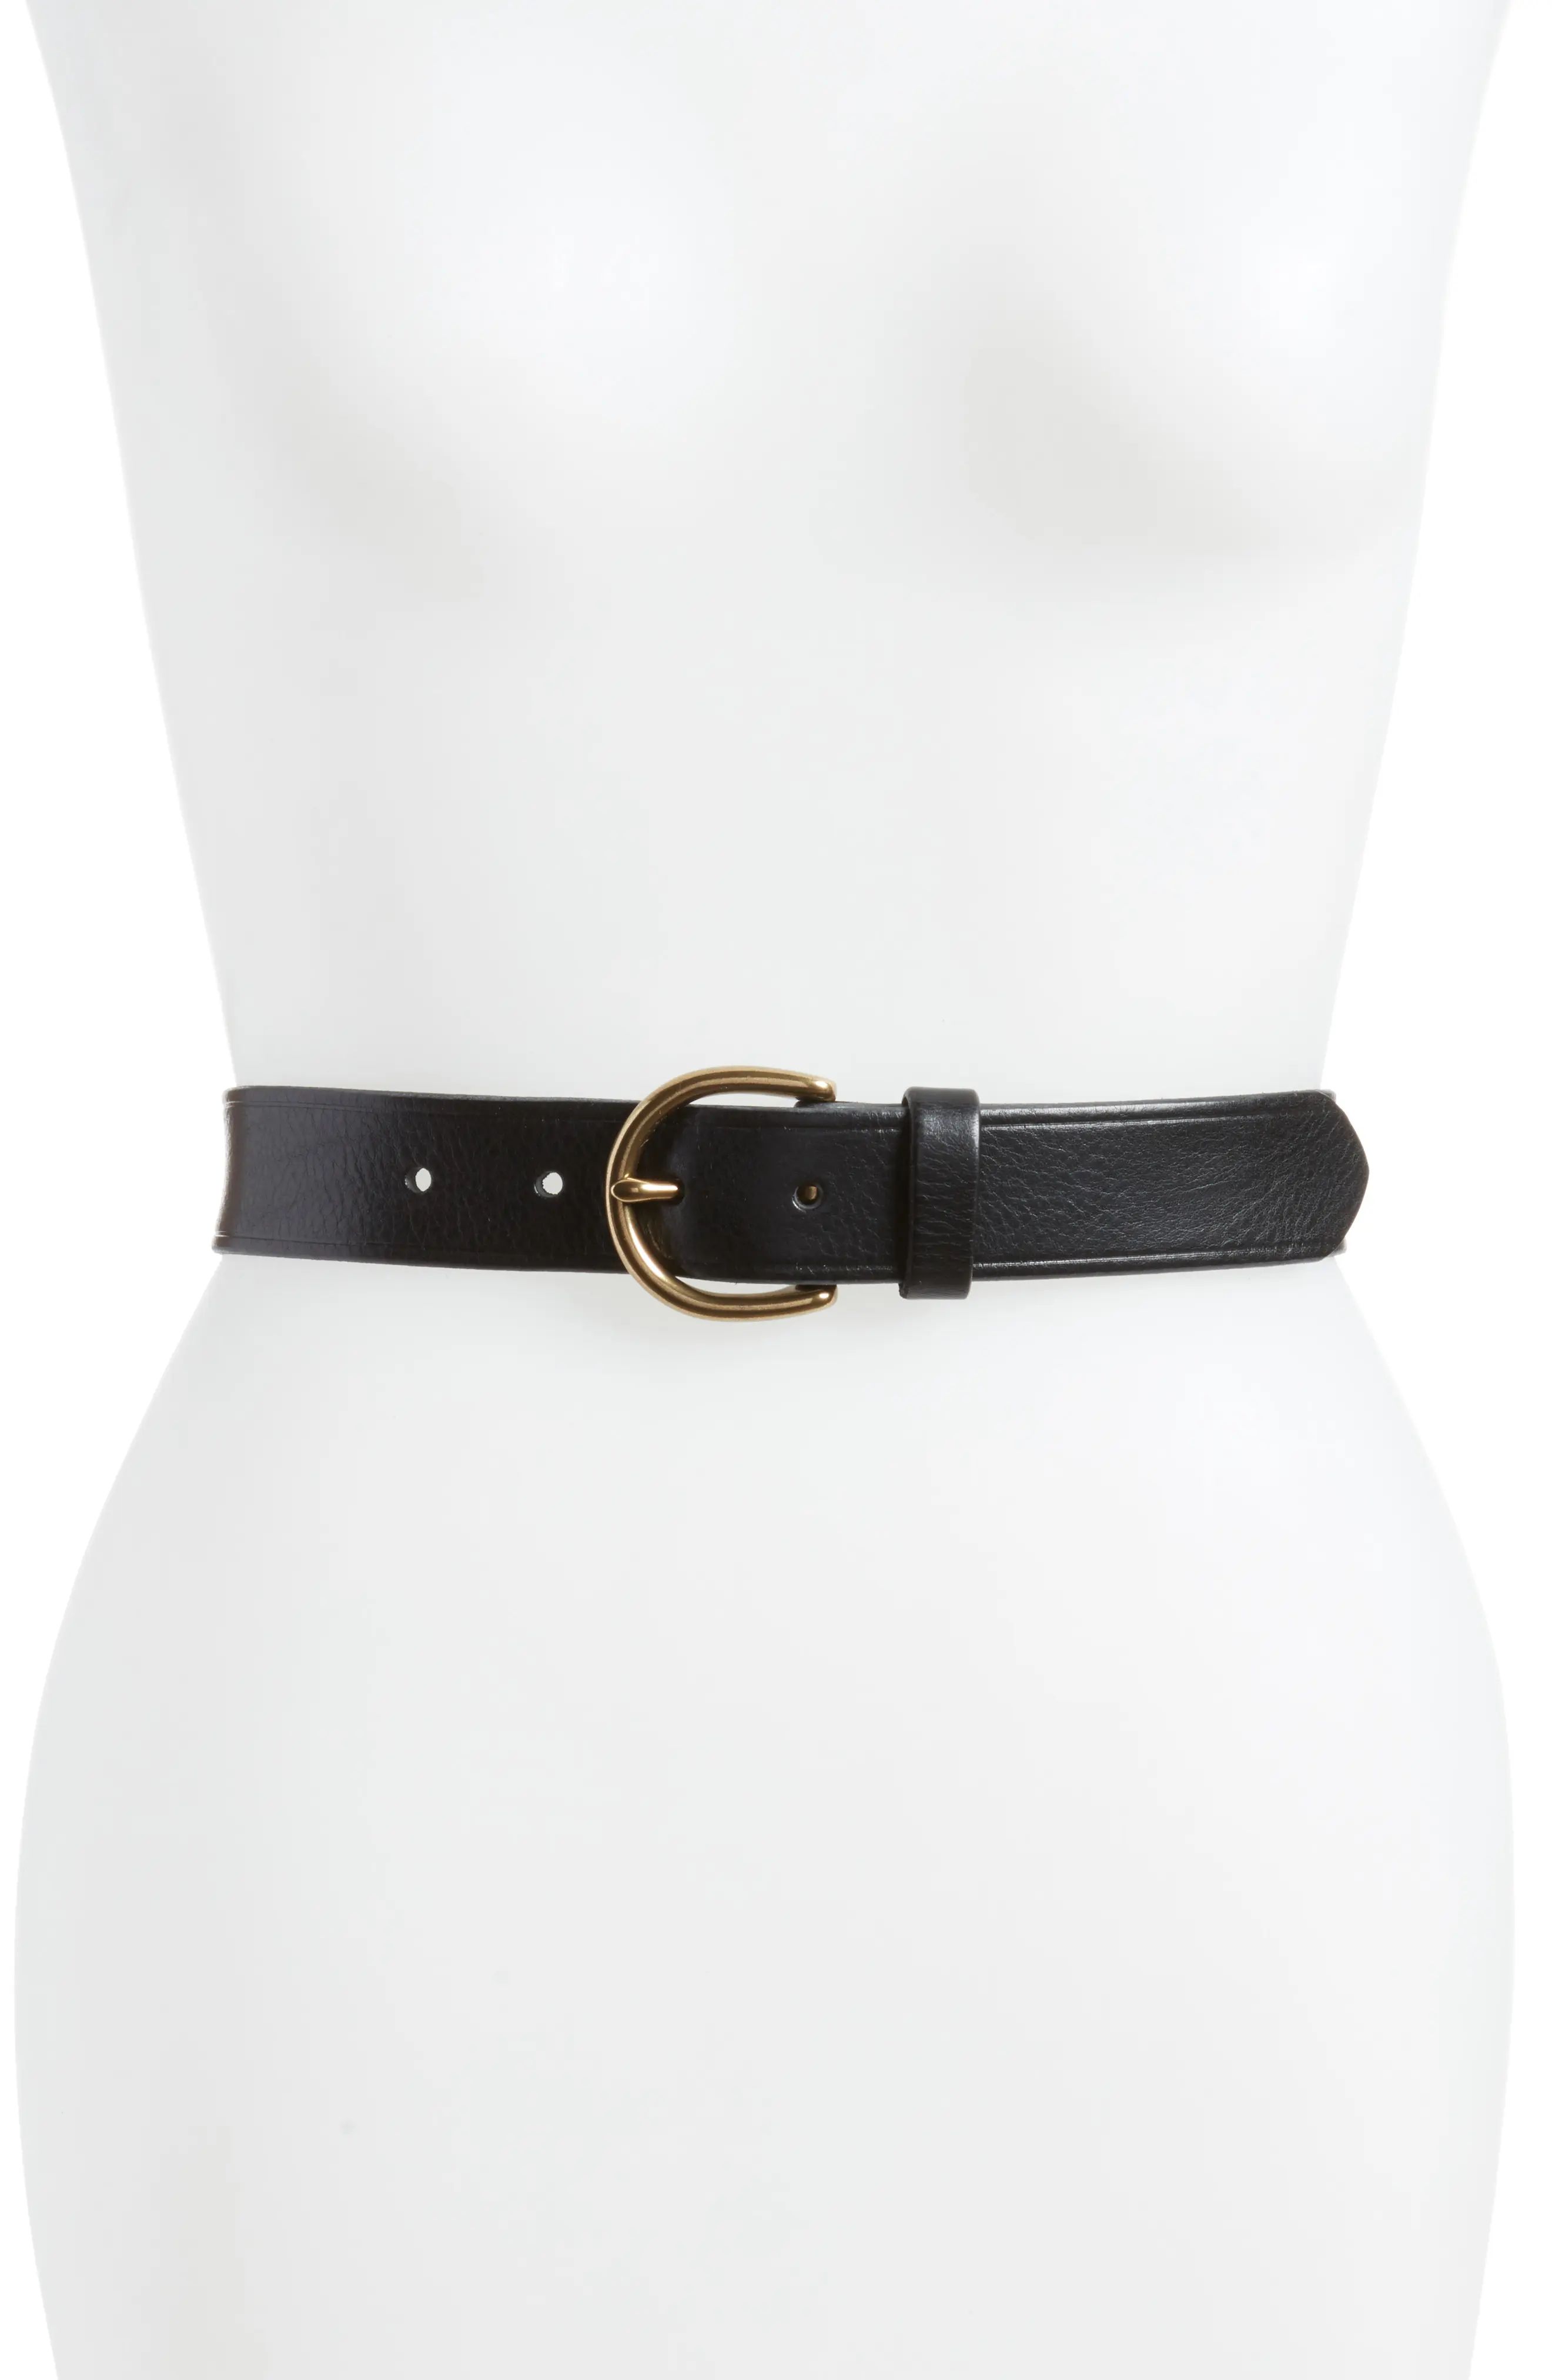 Madewell Medium Perfect Leather Belt in True Black/Gold at Nordstrom | Nordstrom